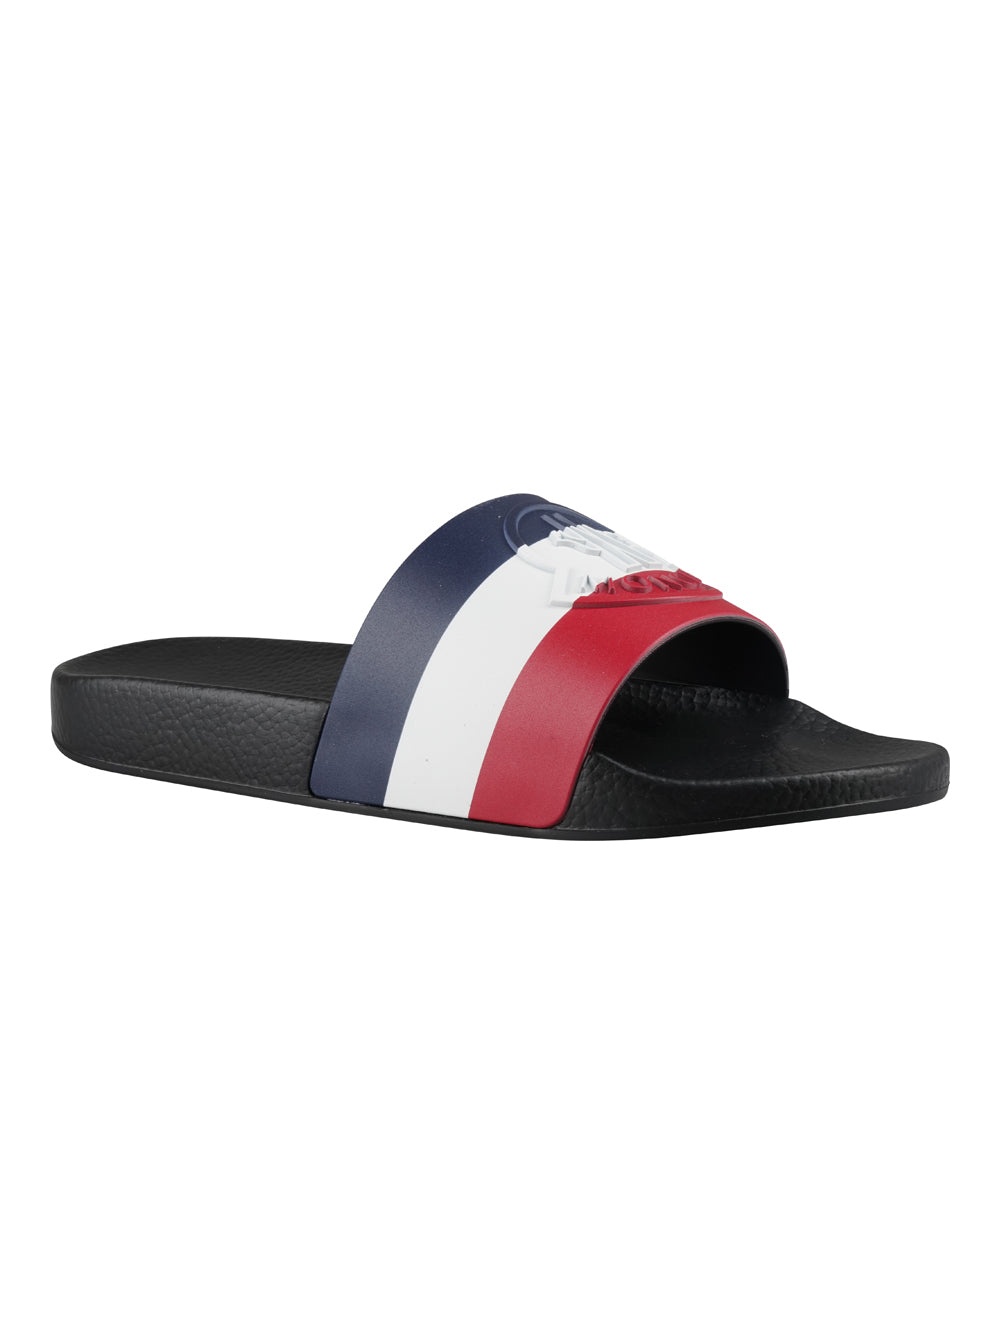 MONCLER MULTICOLOR SLIPPERS - 12